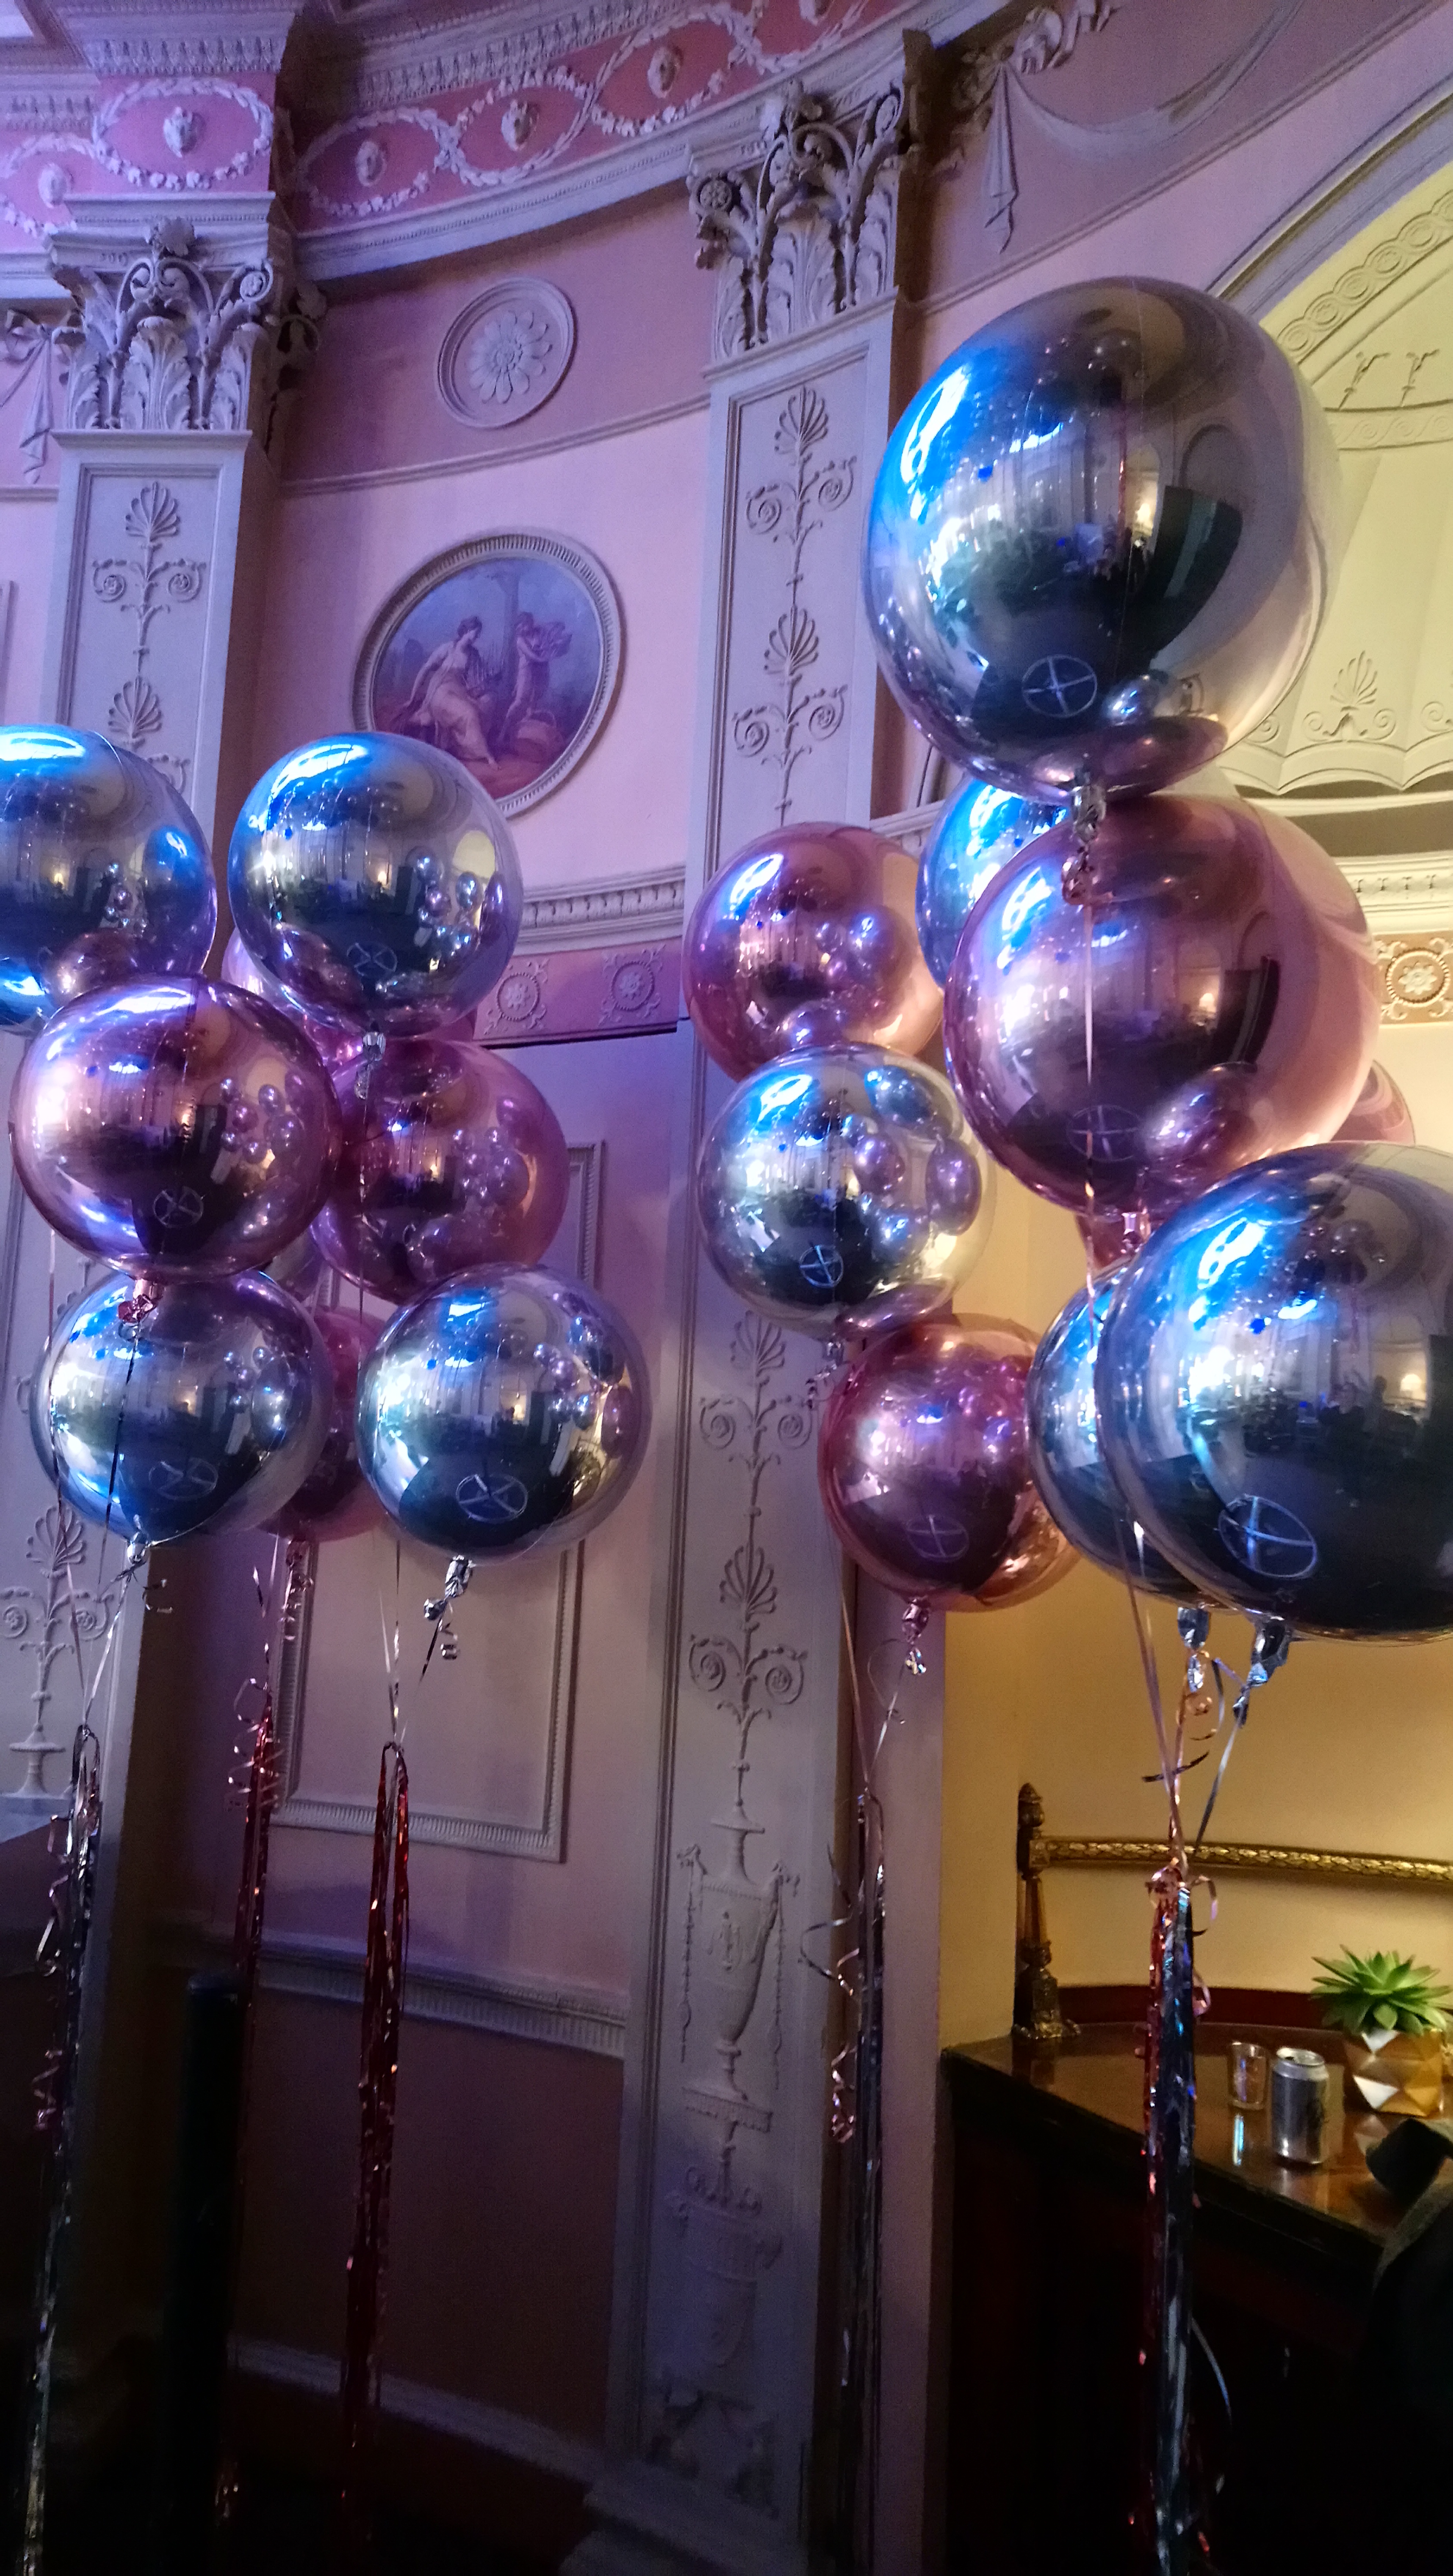 Floor Bouquets if Silver and Pale Pink Orbz Balloons